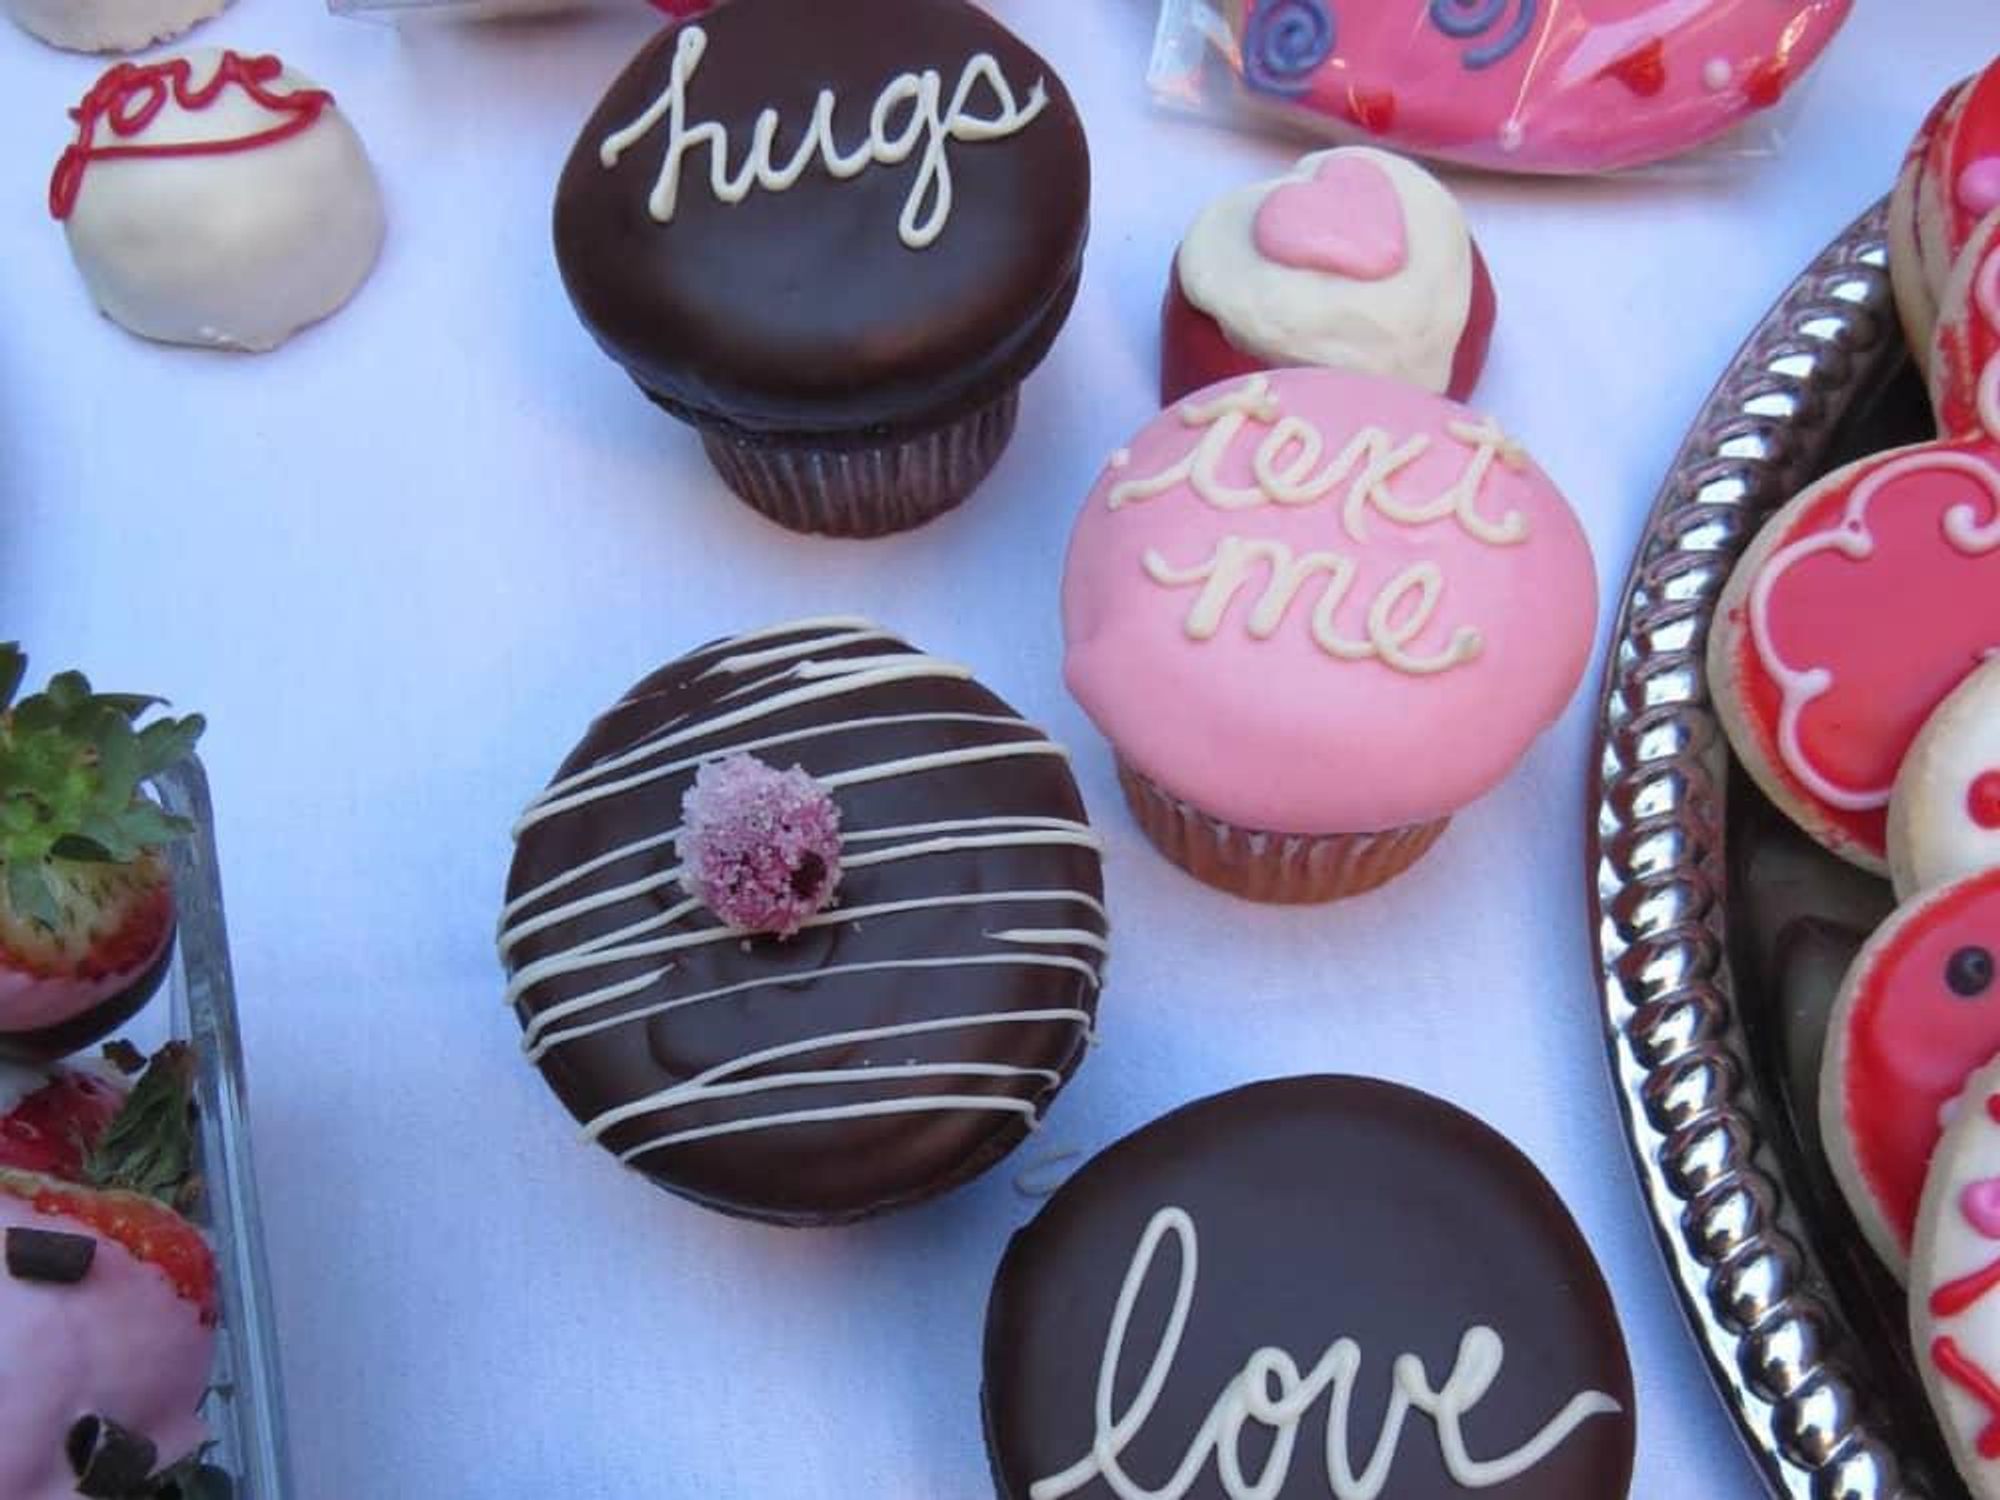 Valentine's Day cupcakes from Bread Winners